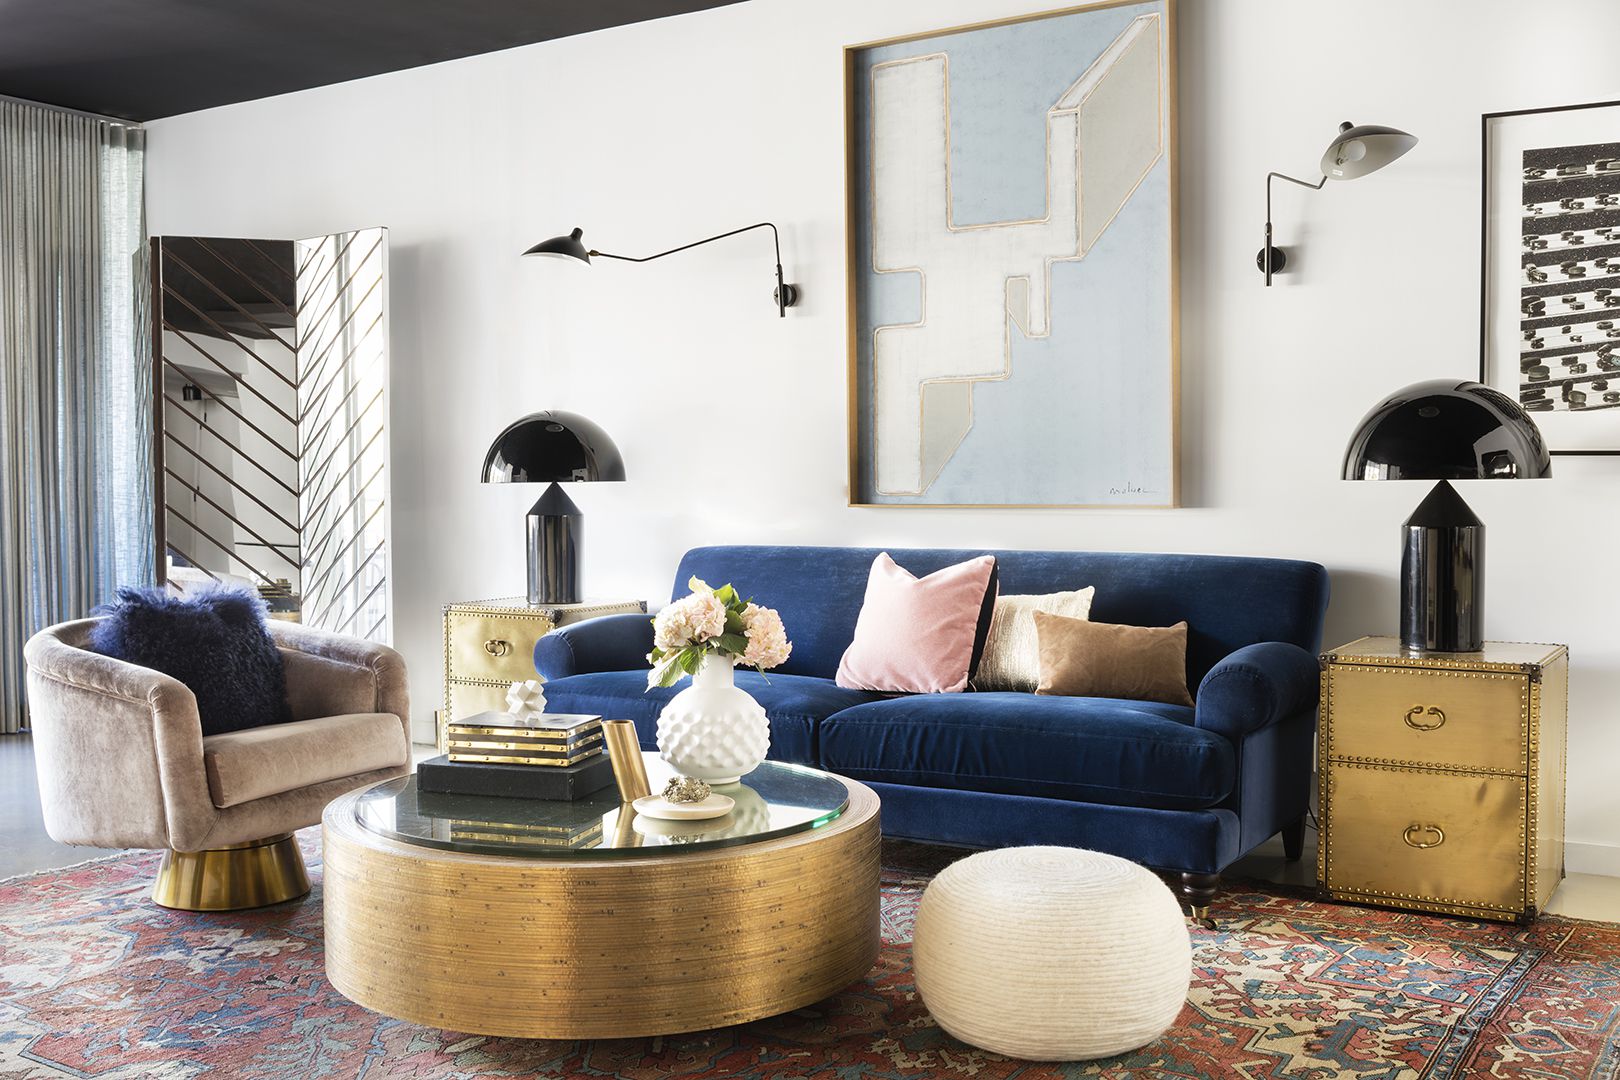 Sweet Tooth’s Guide To Home Improvement: Creating A Sweet And Stylish Space